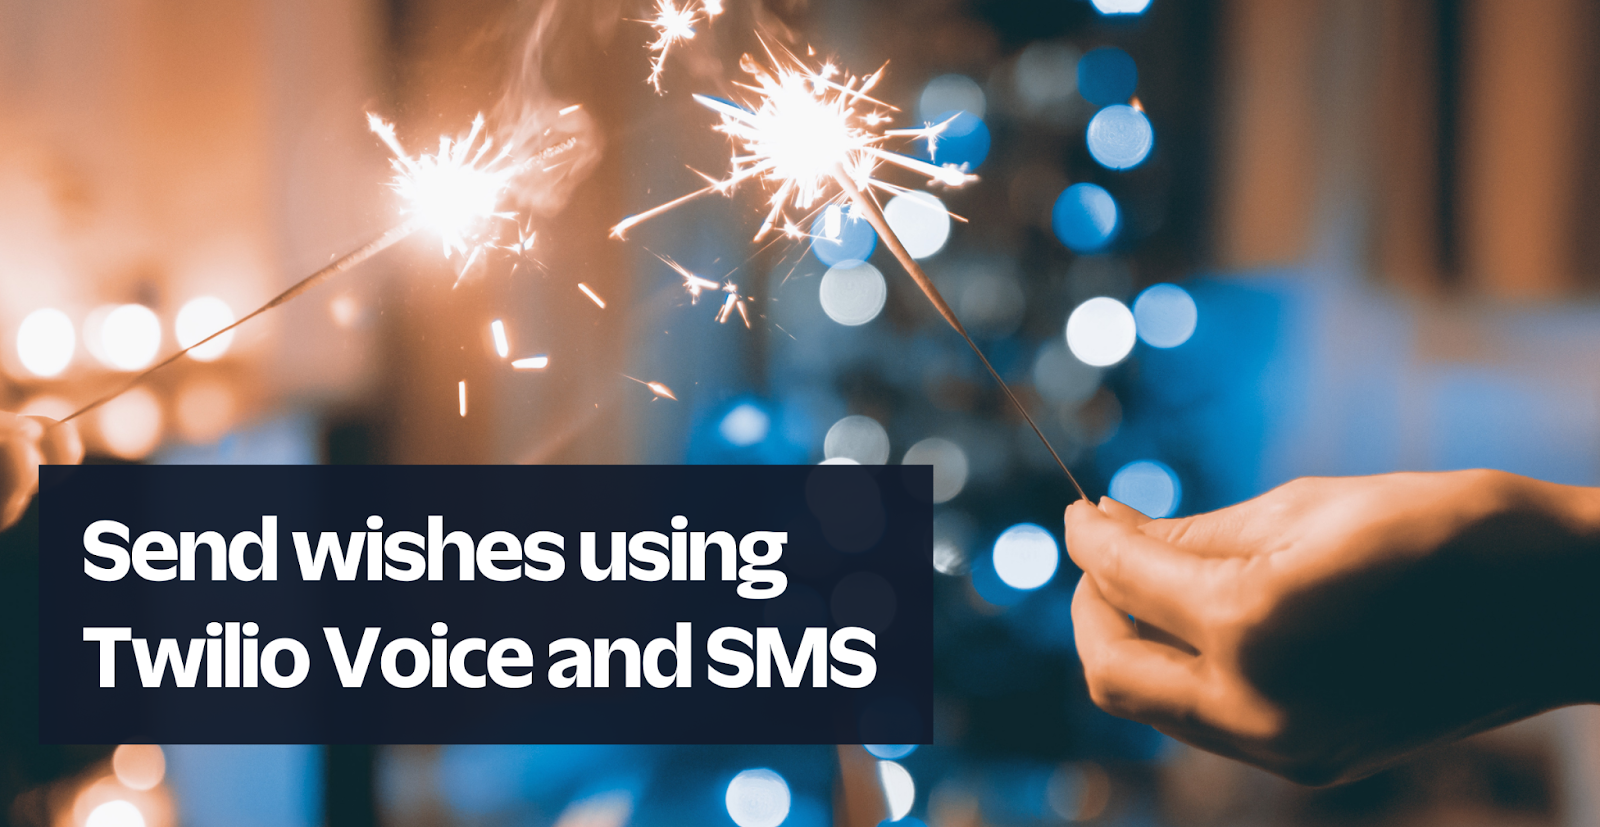 Send wishes using Twilio Voice and SMS